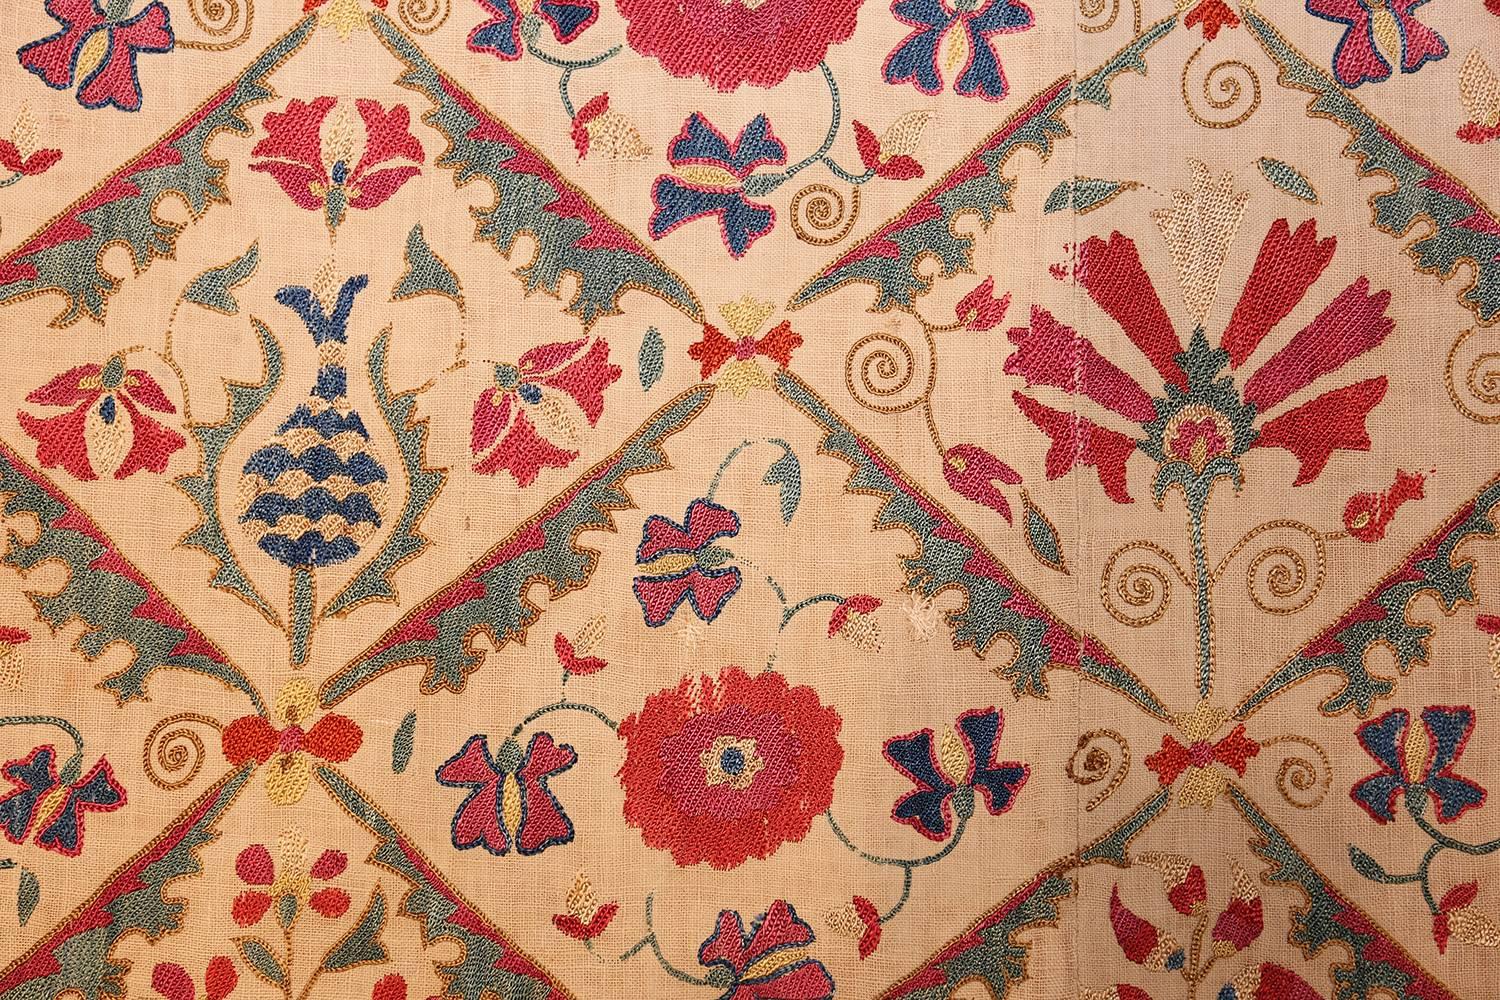 Early 19th Century Suzani Uzbek Textile. Size: 5 ft 4 in x 5 ft 7 in  5